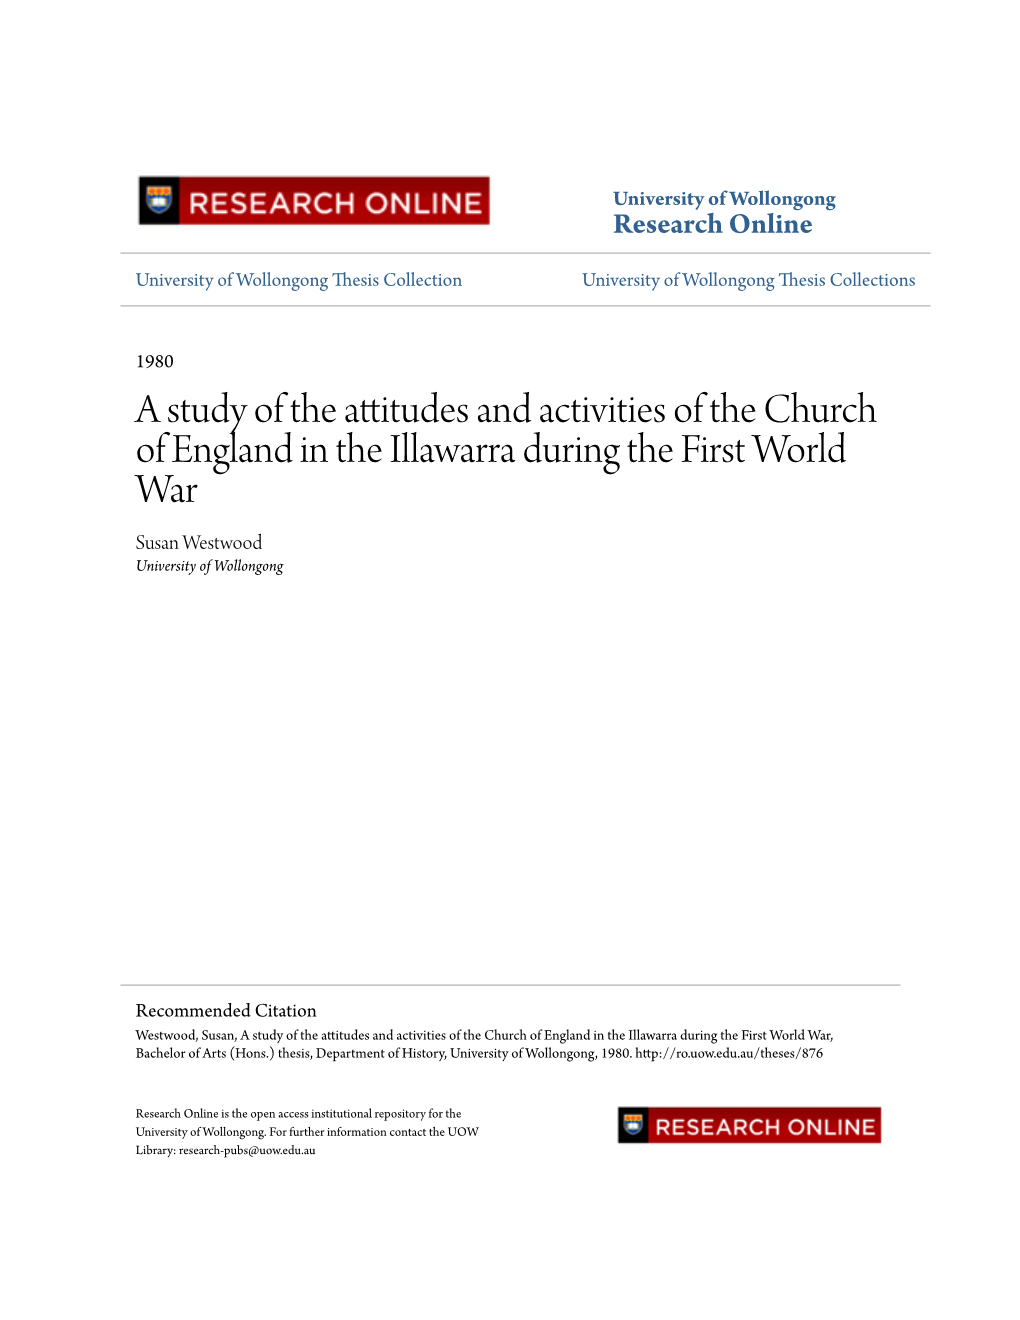 A Study of the Attitudes and Activities of the Church of England in the Illawarra During the First World War Susan Westwood University of Wollongong